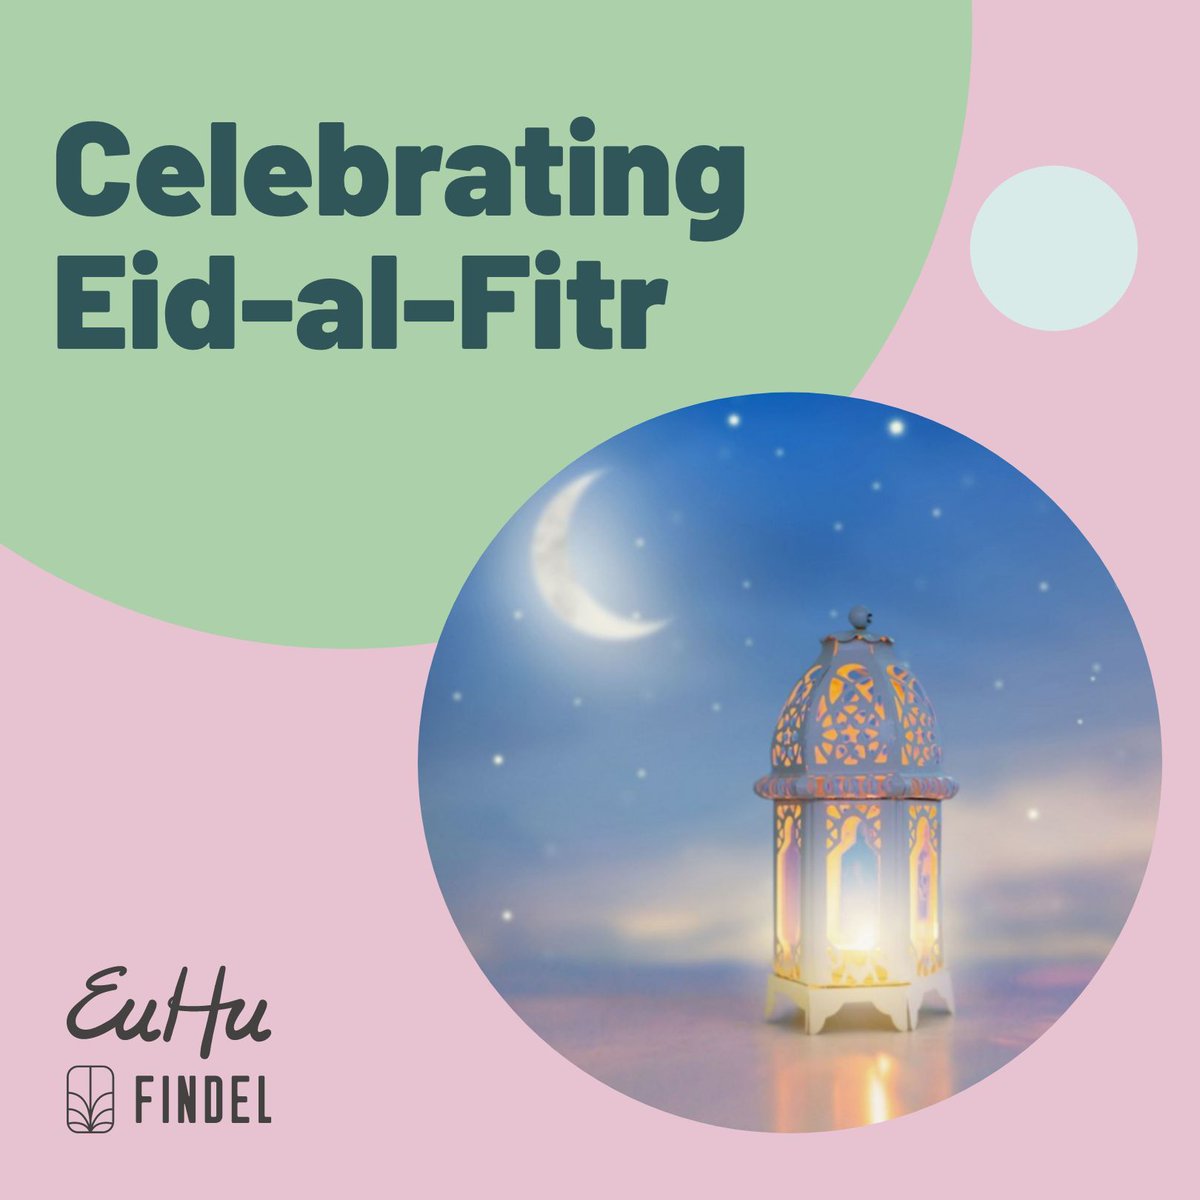 🌙 Don't forget to teach your little learners all about Eid-al-Fitr when you return from the holidays! Click here to view our assembly, especially for EYFS pupils and use promo code EYFS1MONTH for one month FREE: buff.ly/3J8FoBN #EidAlFitr #EducationForKids #EYFSAssembly